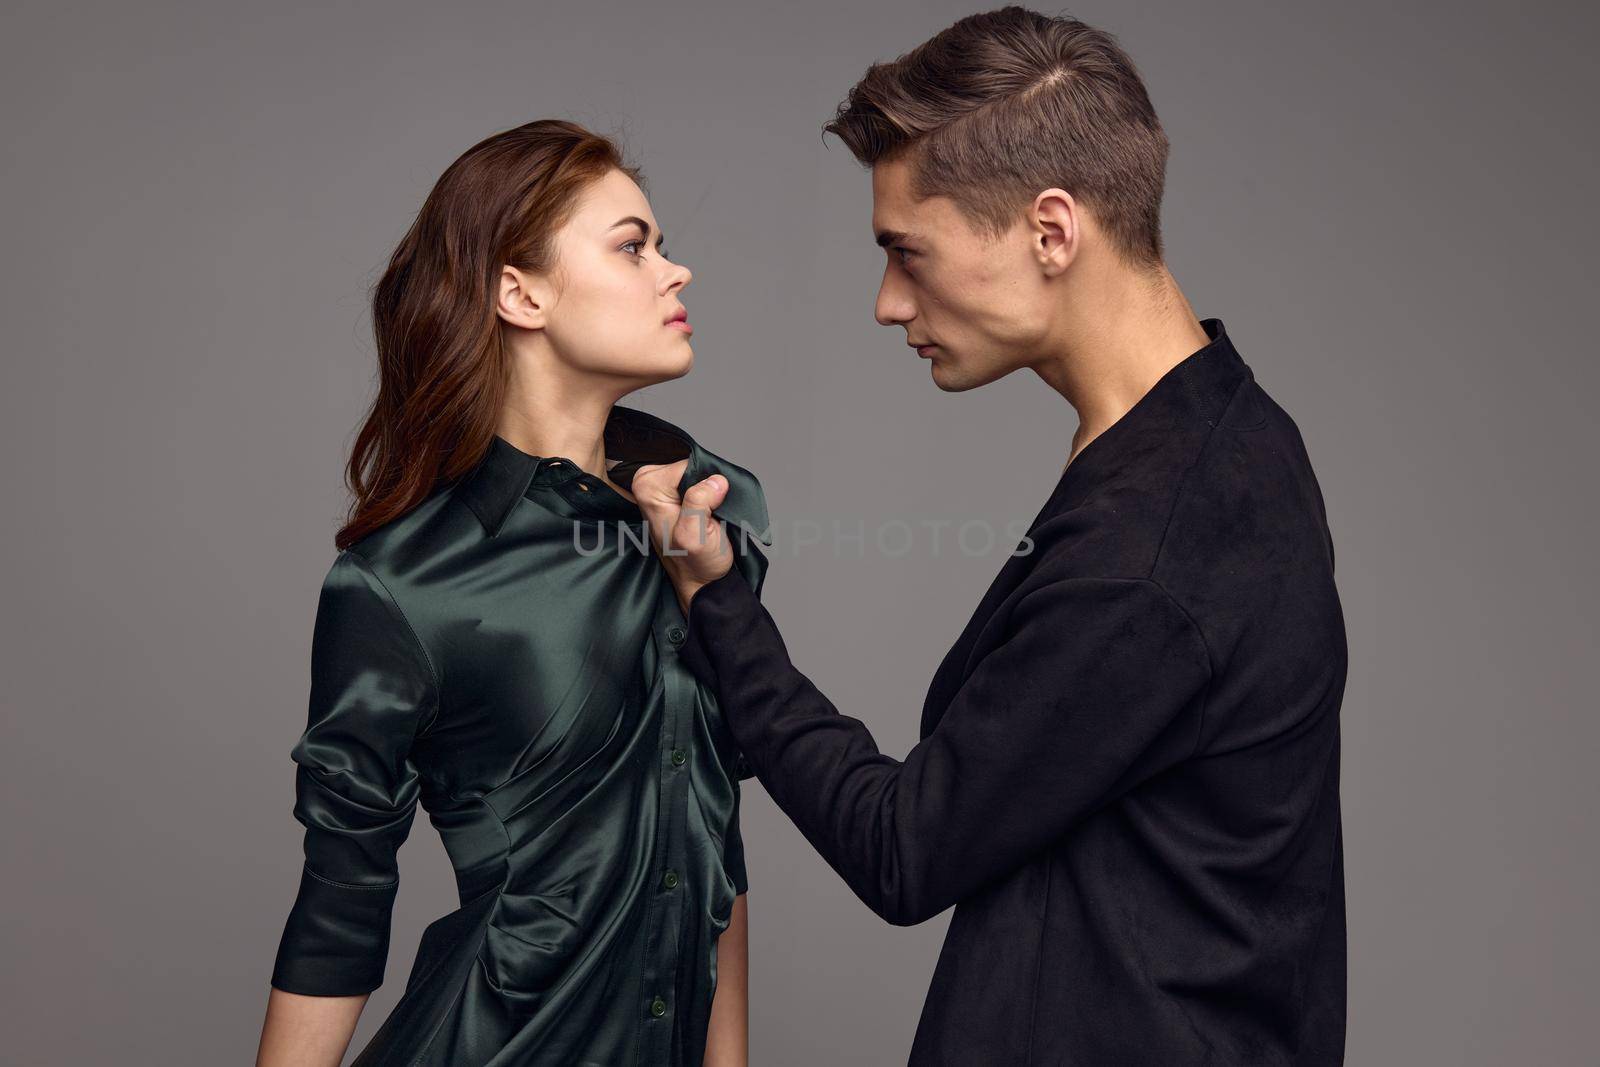 A frightened woman in a dress is looking at an aggressive man on a gray background by SHOTPRIME